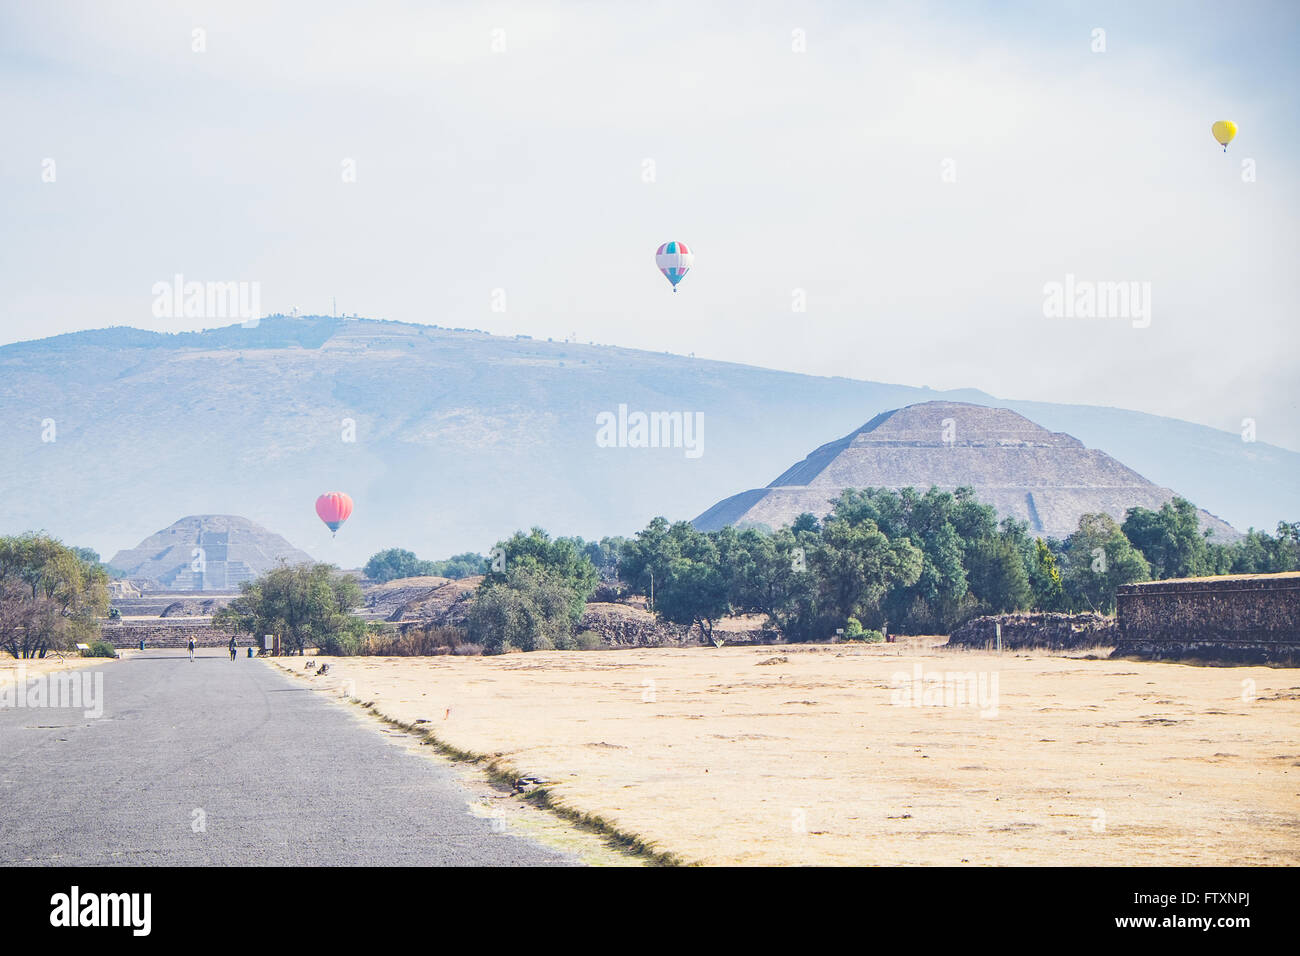 Hot air balloons flying over ancient ruins of Teotihuacan, Mexico Stock Photo